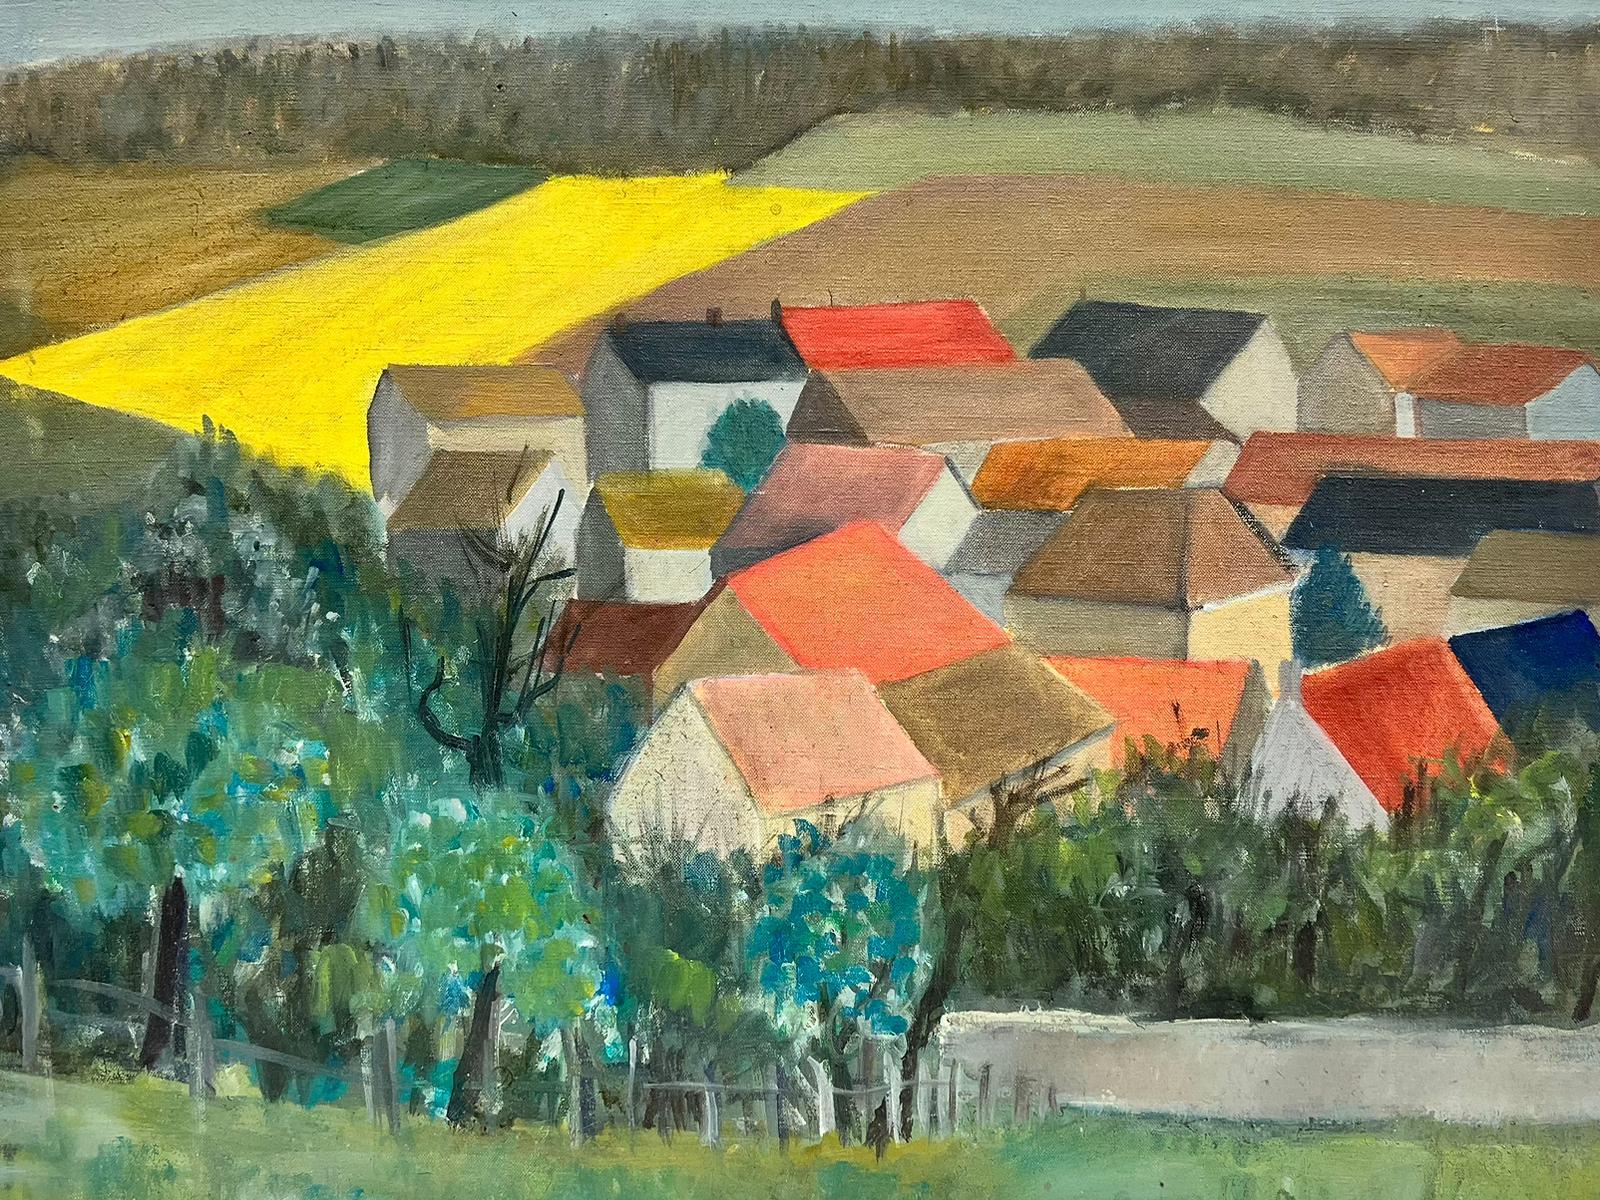 French Post Impressionist Landscape Painting - Mid Century French Cubist/ Post Impressionist Oil Red Roof Houses in Landscape